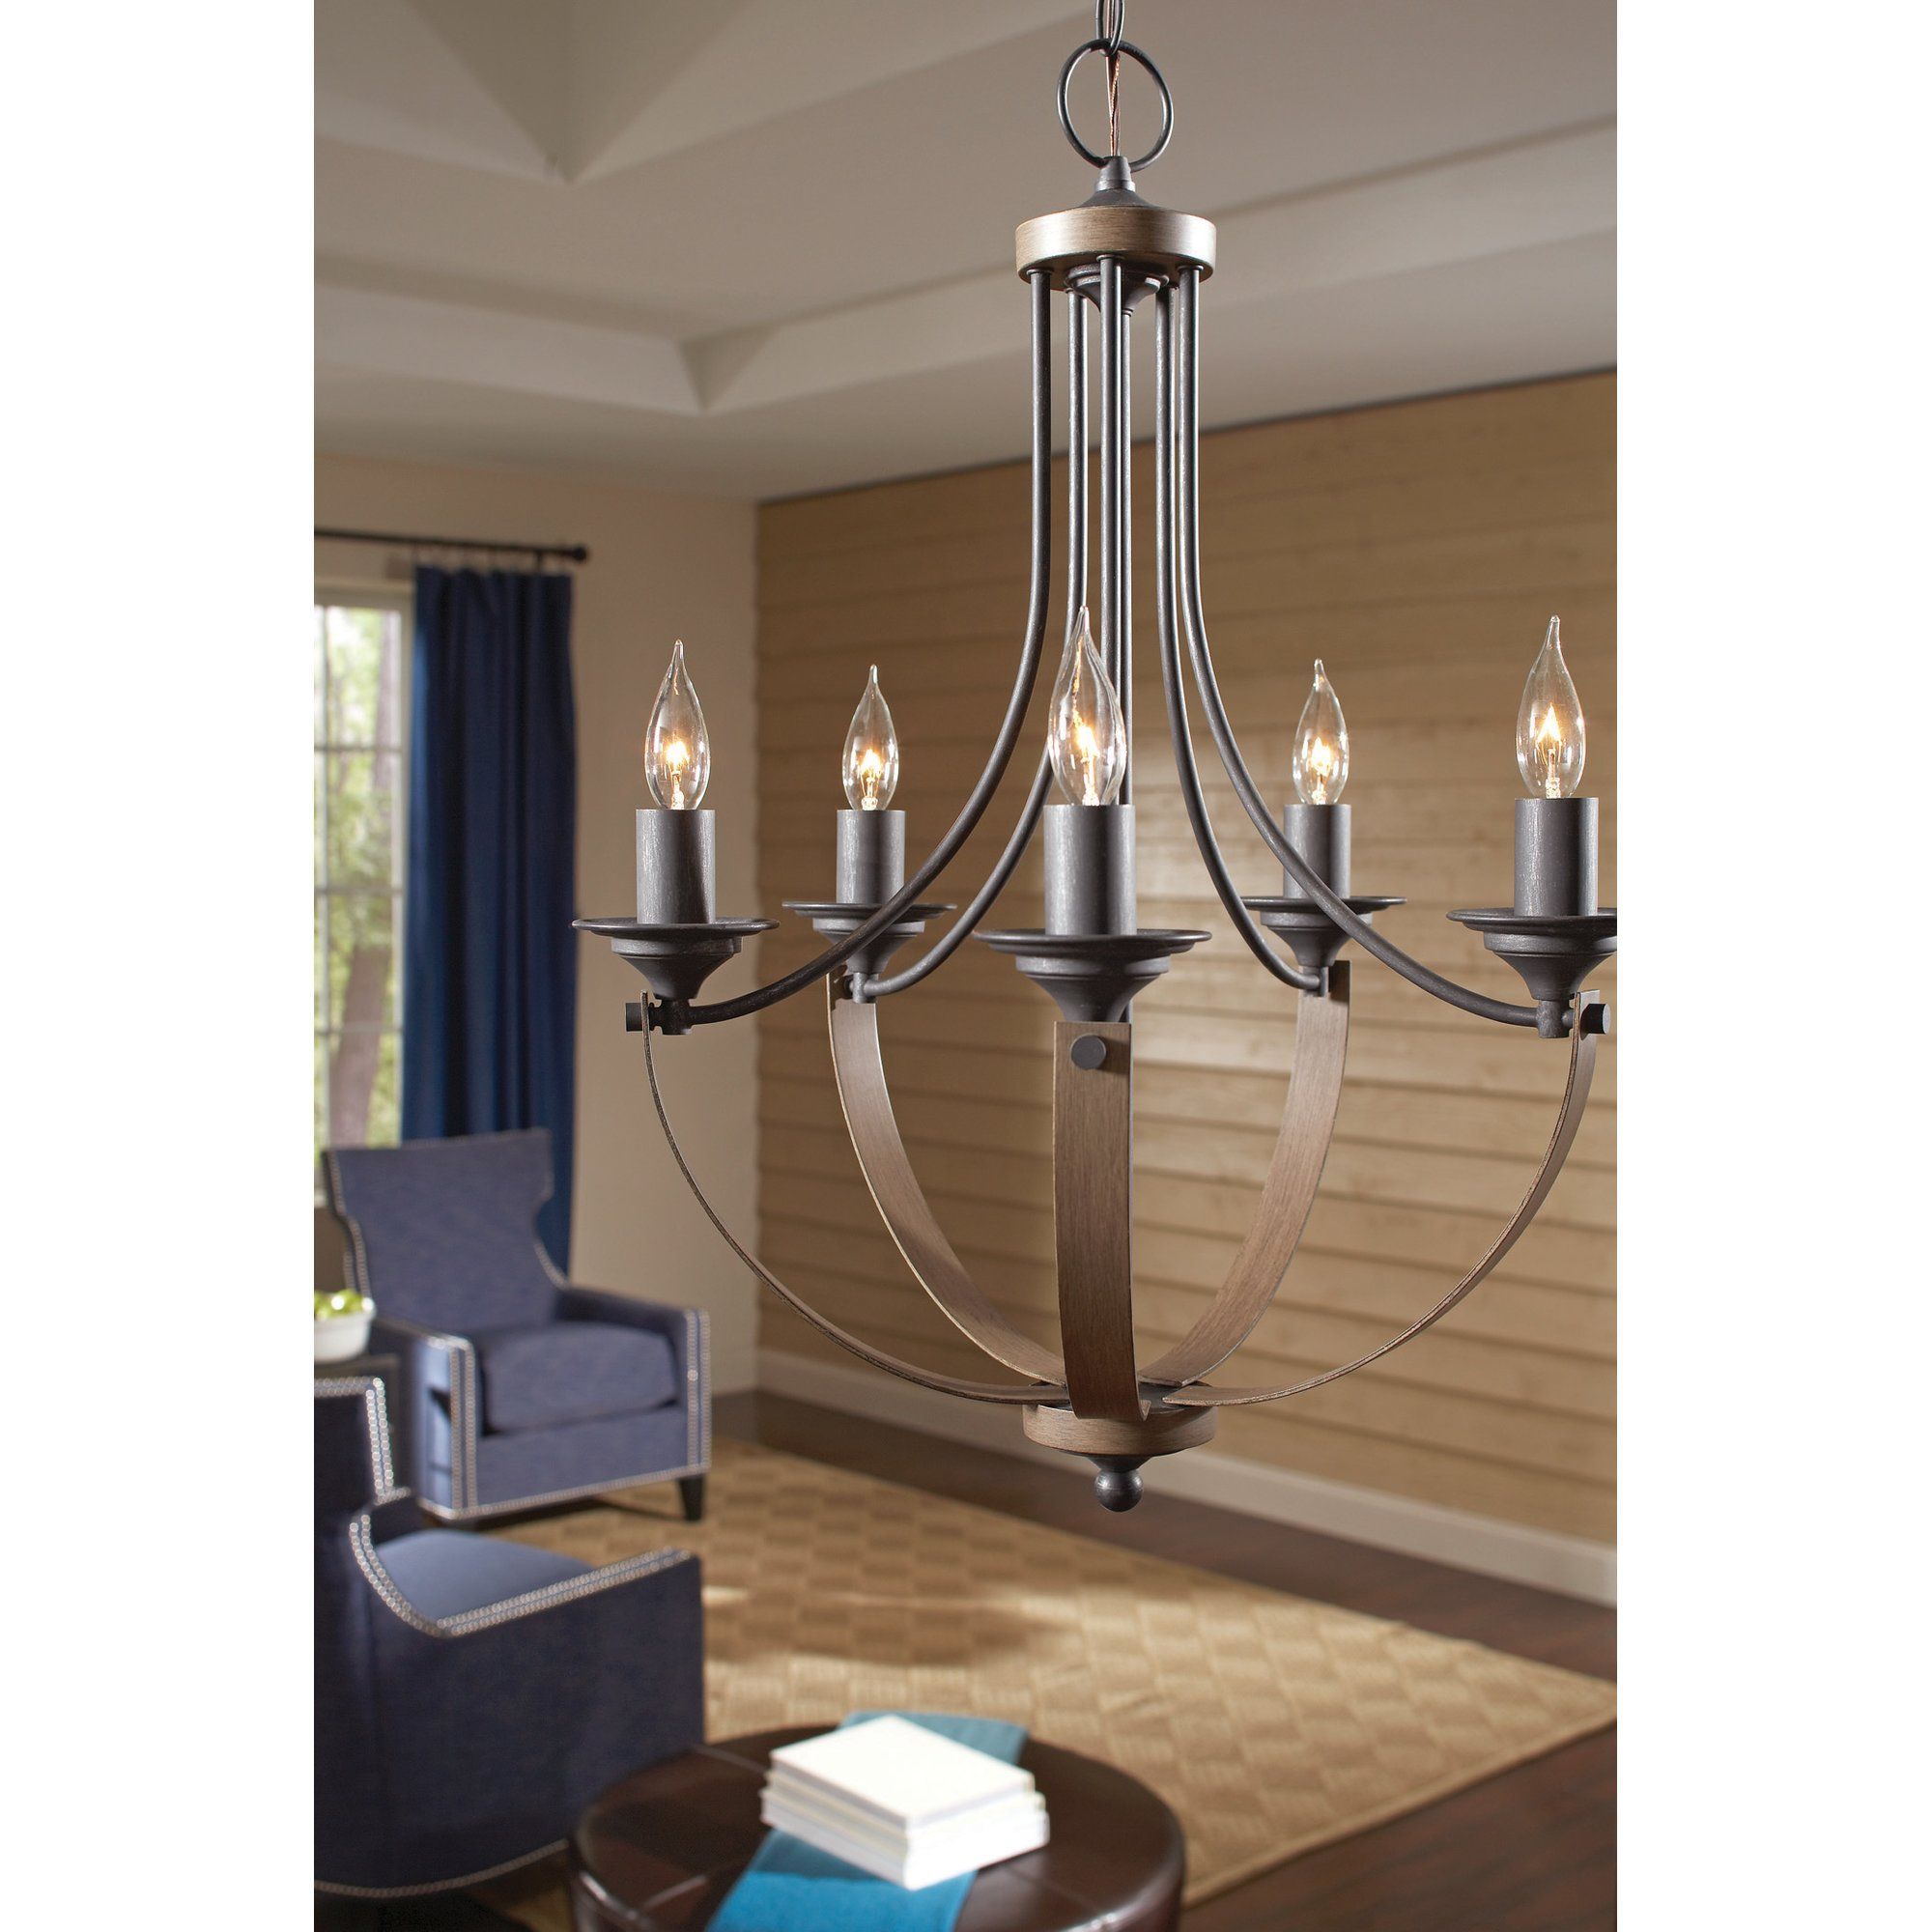 25 Camilla 9 Light Candle Style Chandelier – Divineducation Within Camilla 9 Light Candle Style Chandeliers (View 5 of 30)